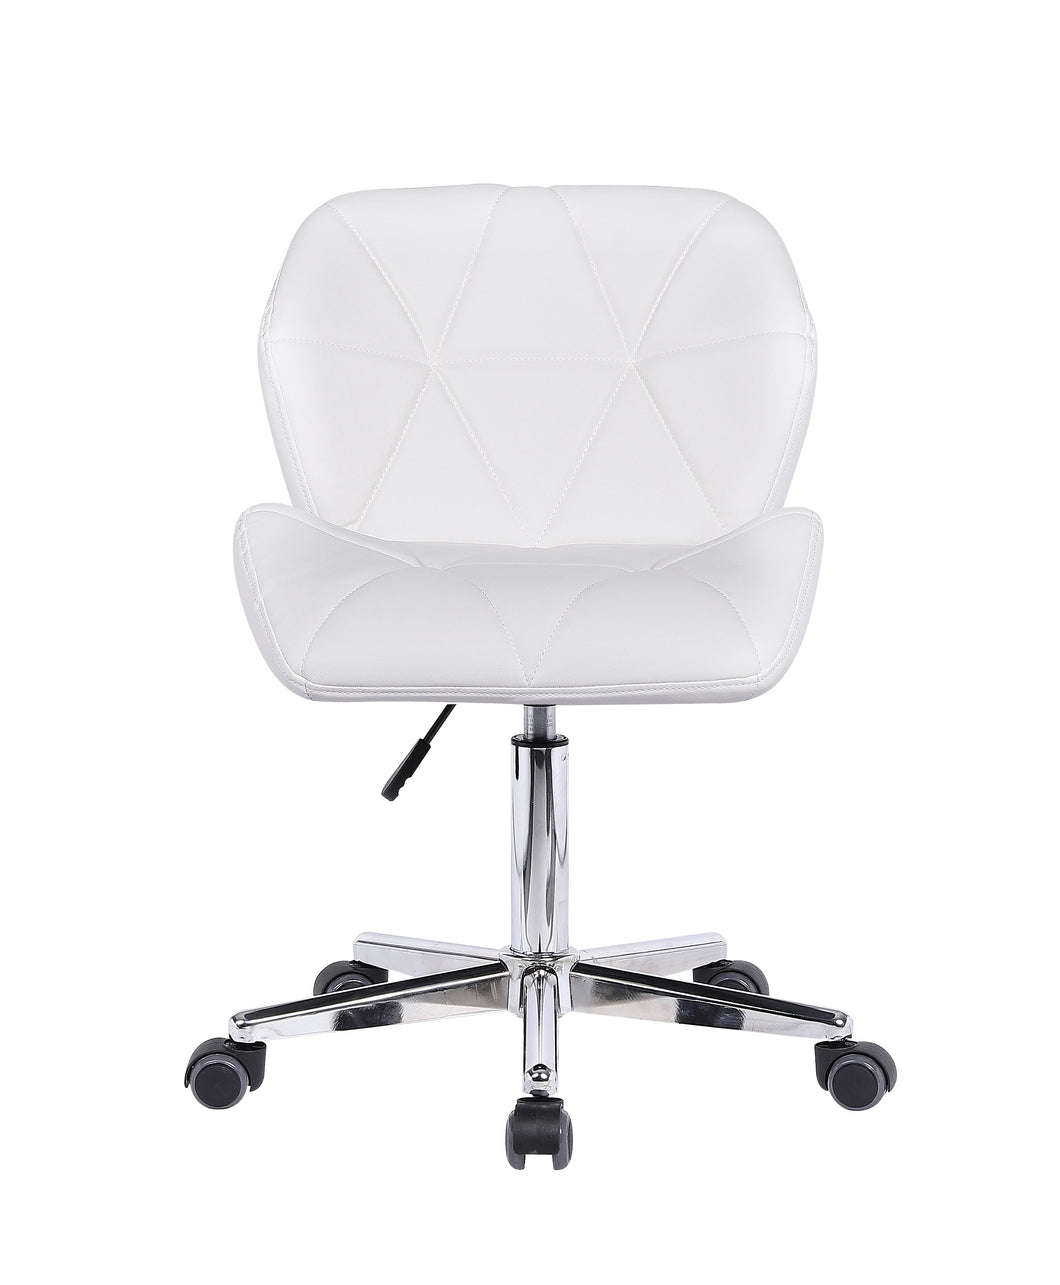 OFFICE SERIES/ 714W COMPUTER OFFICE CHAIR (WHITE)